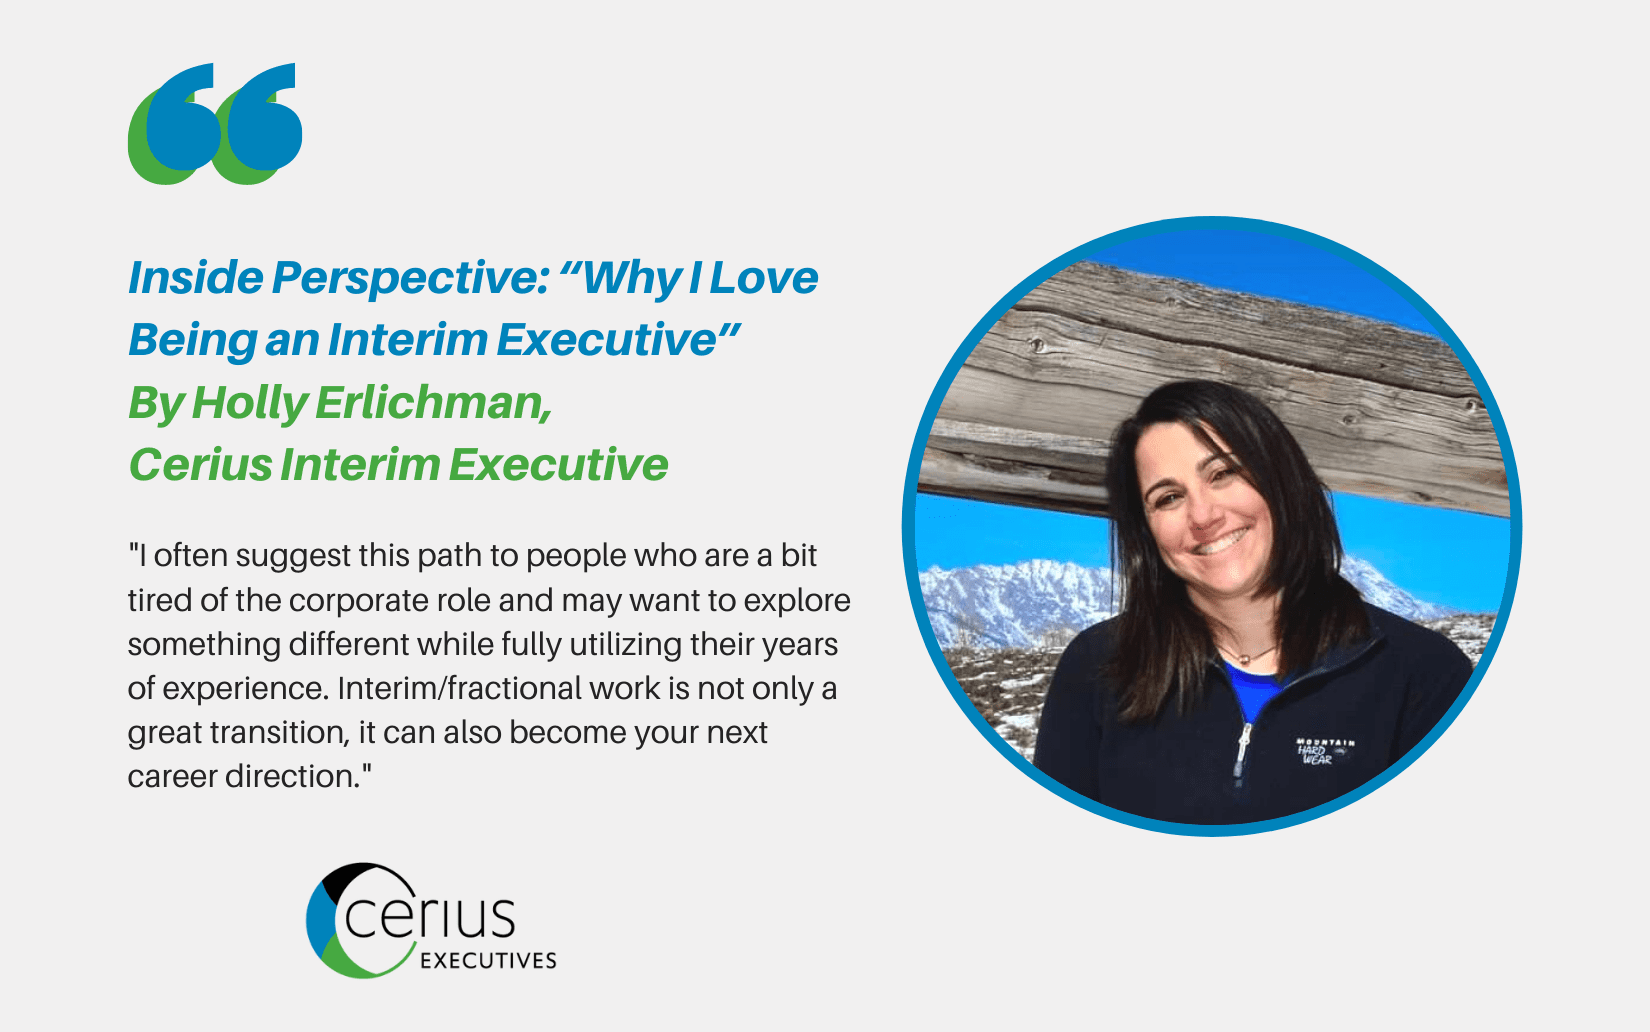 Inside Perspective: “Why I Love Being an Interim Executive”